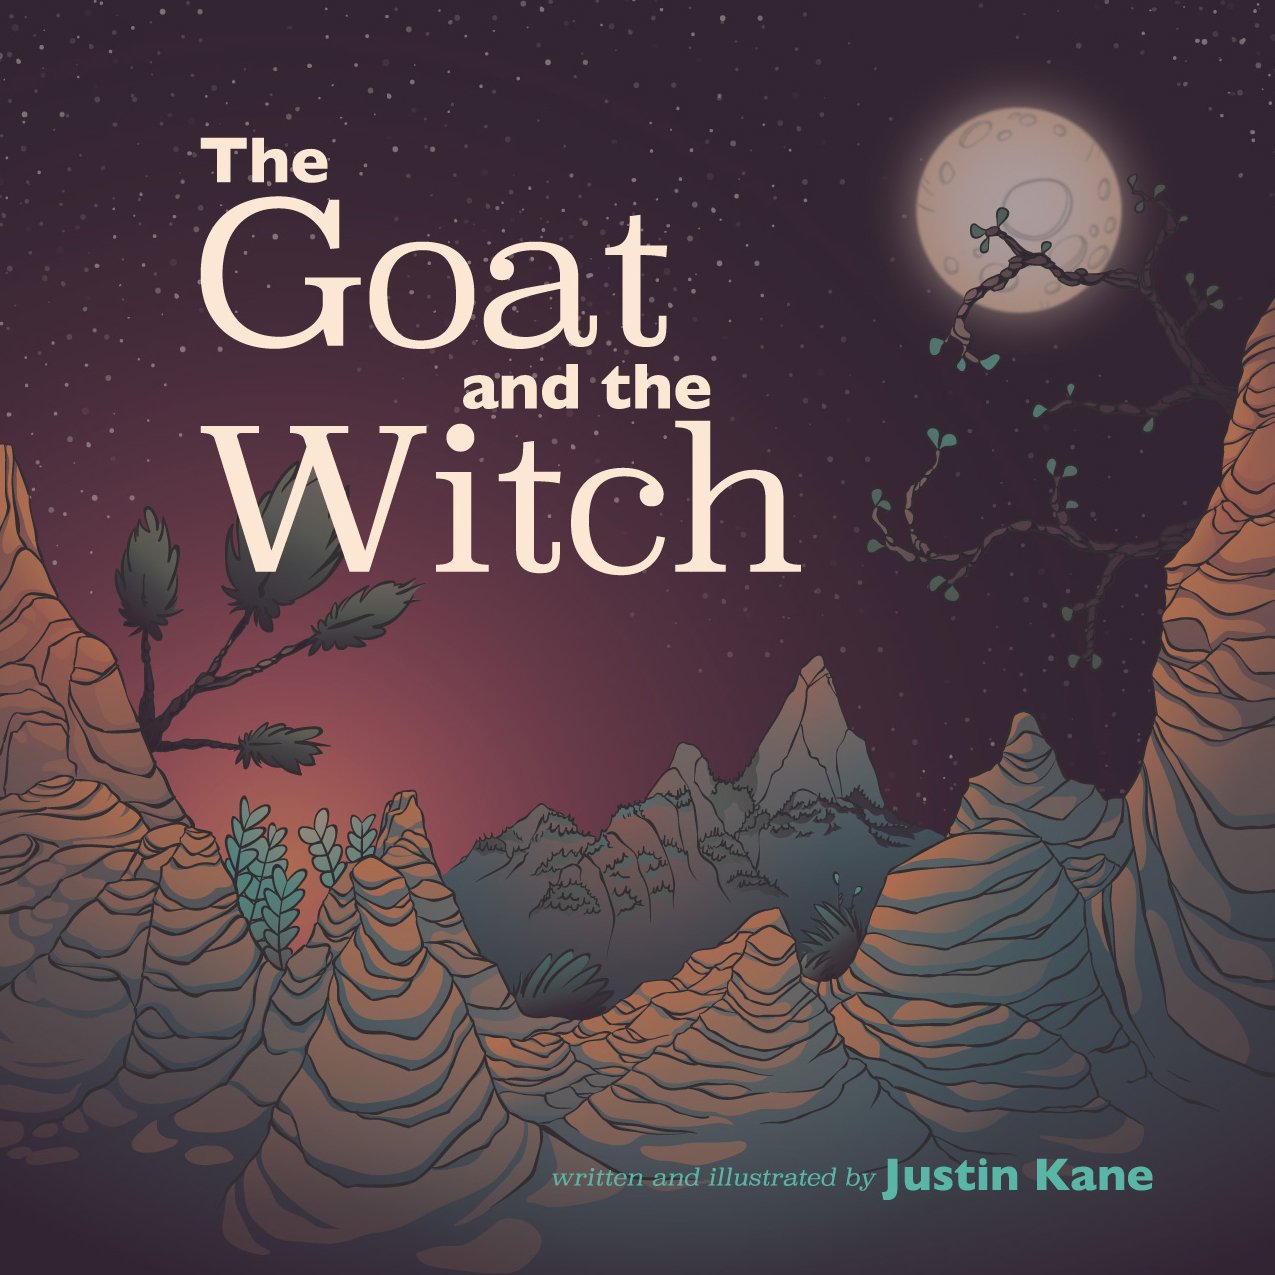 Image of The Goat and the Witch